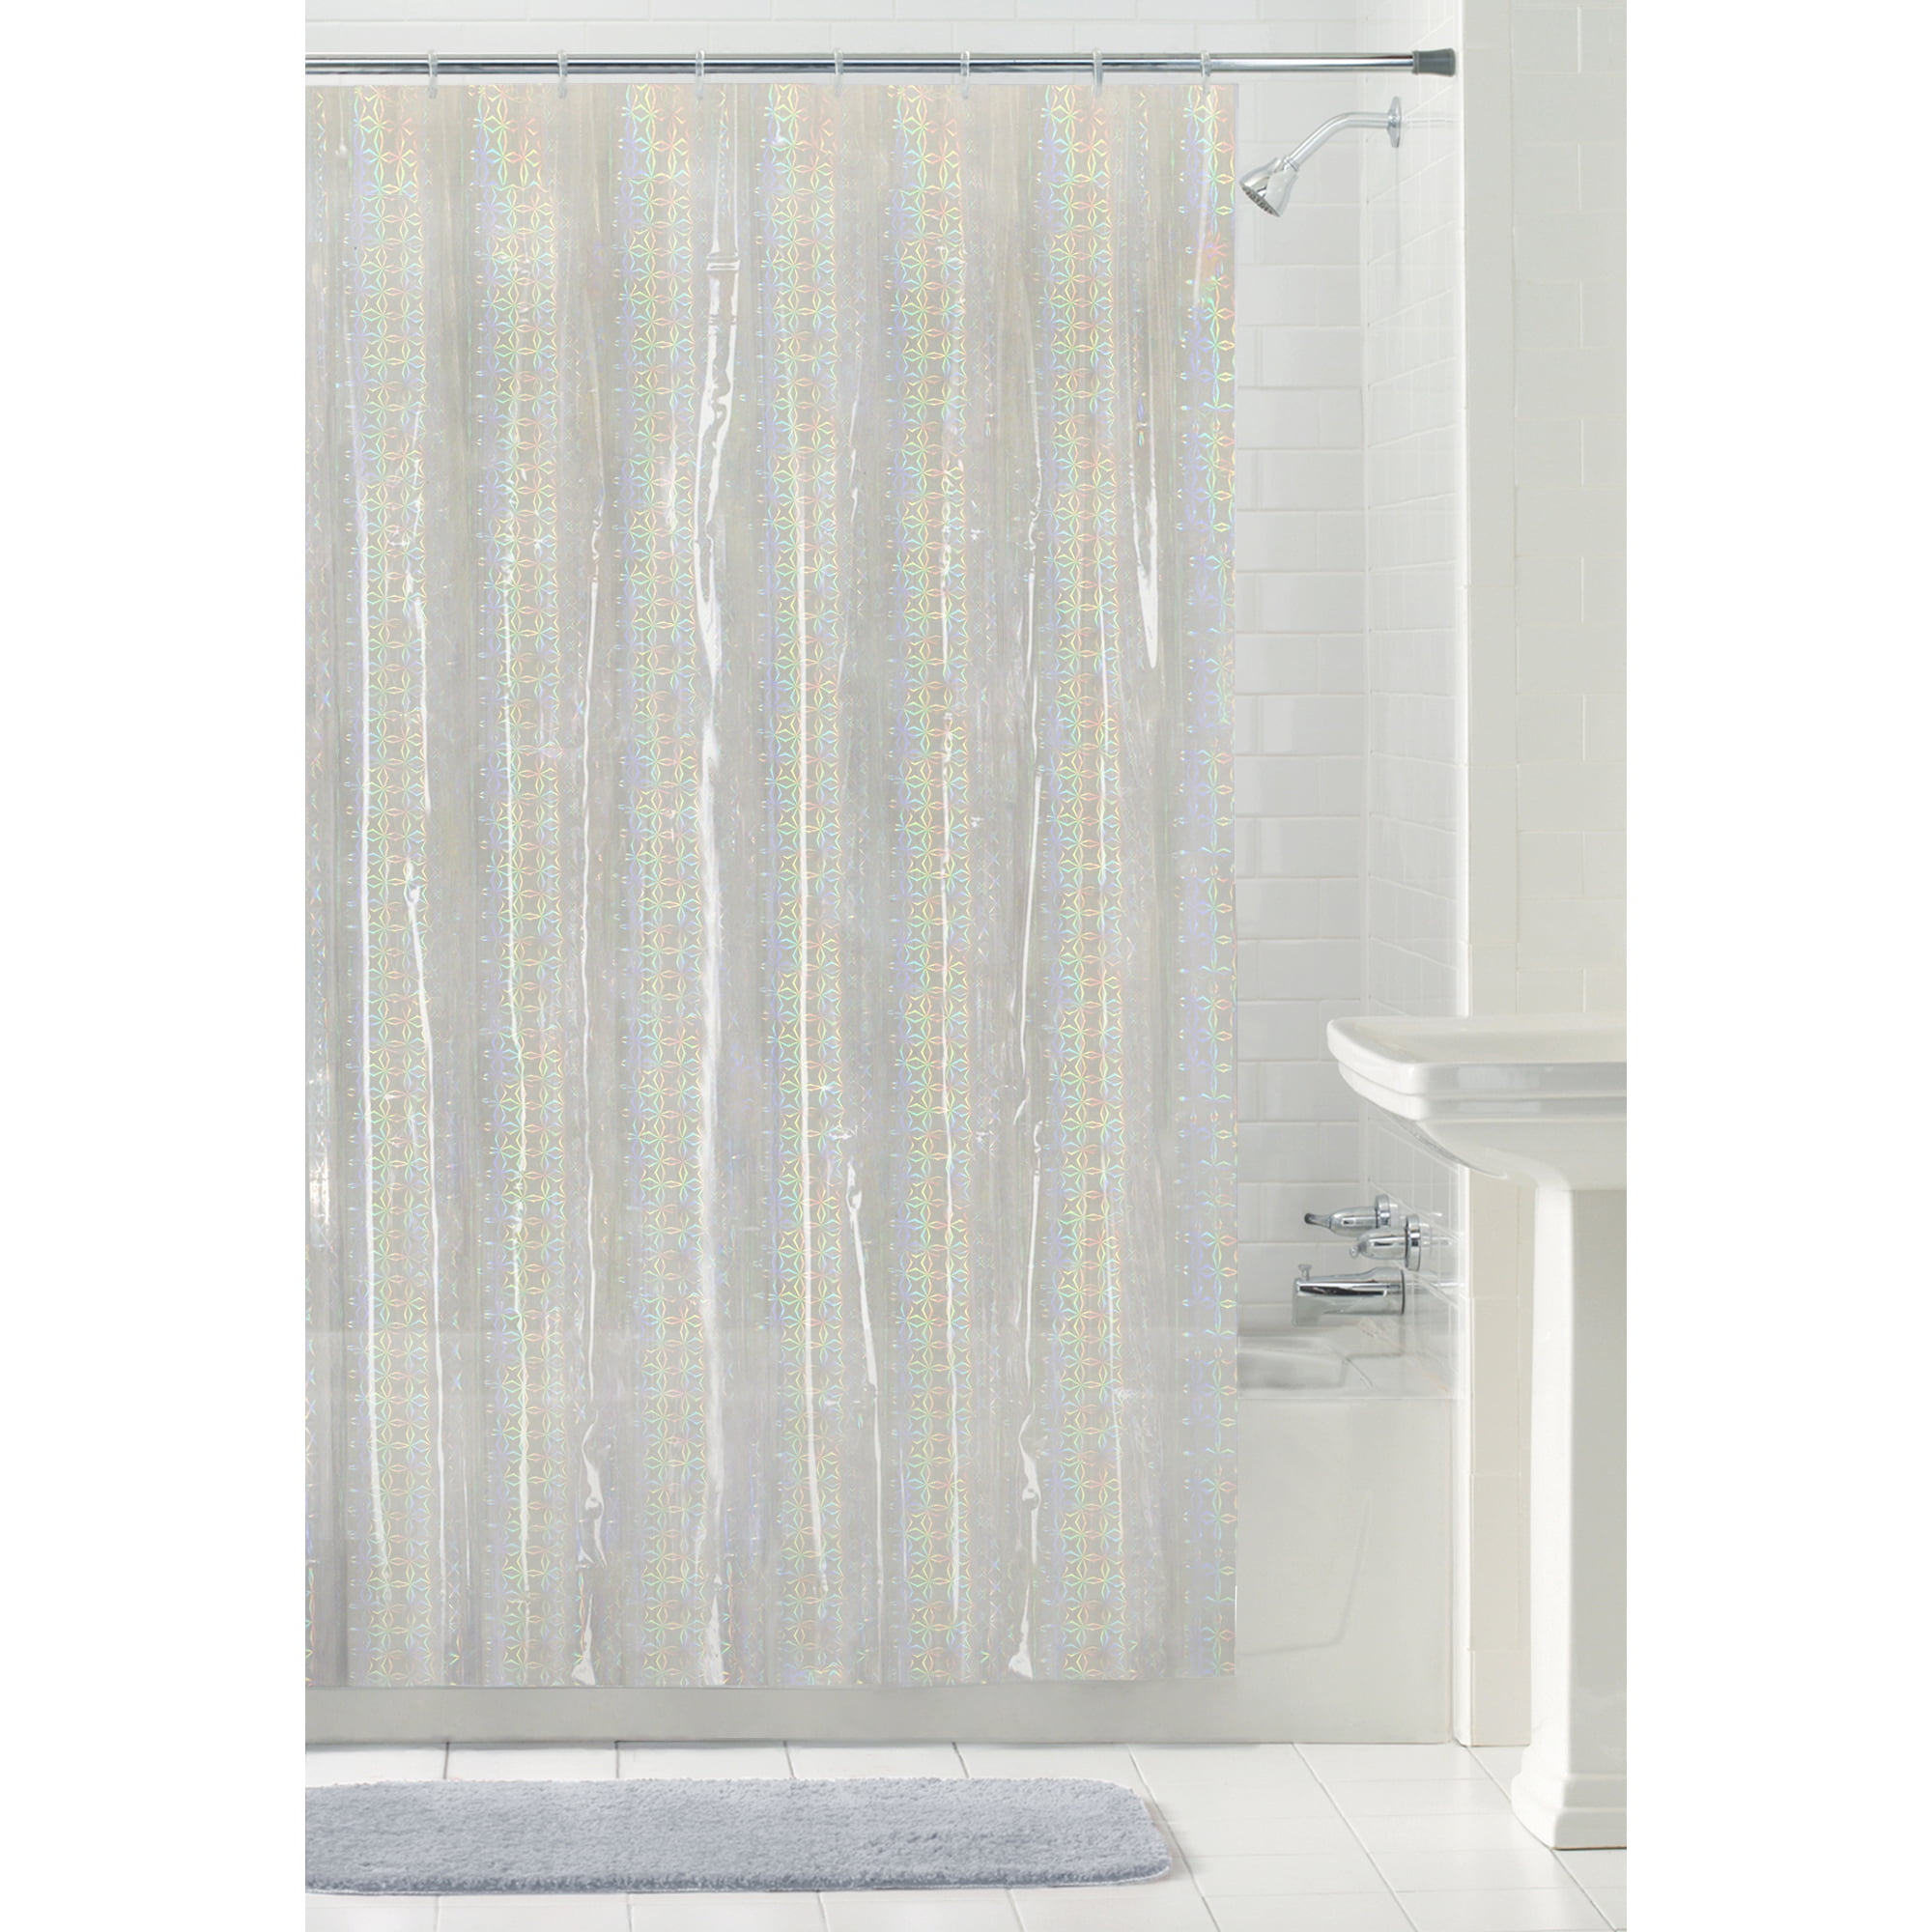 Details about   SET OF ONE CLEAR MAGNETIC LINER & SHOWER CURTAIN 70 IN X 72 IN FREE SHIPPING 